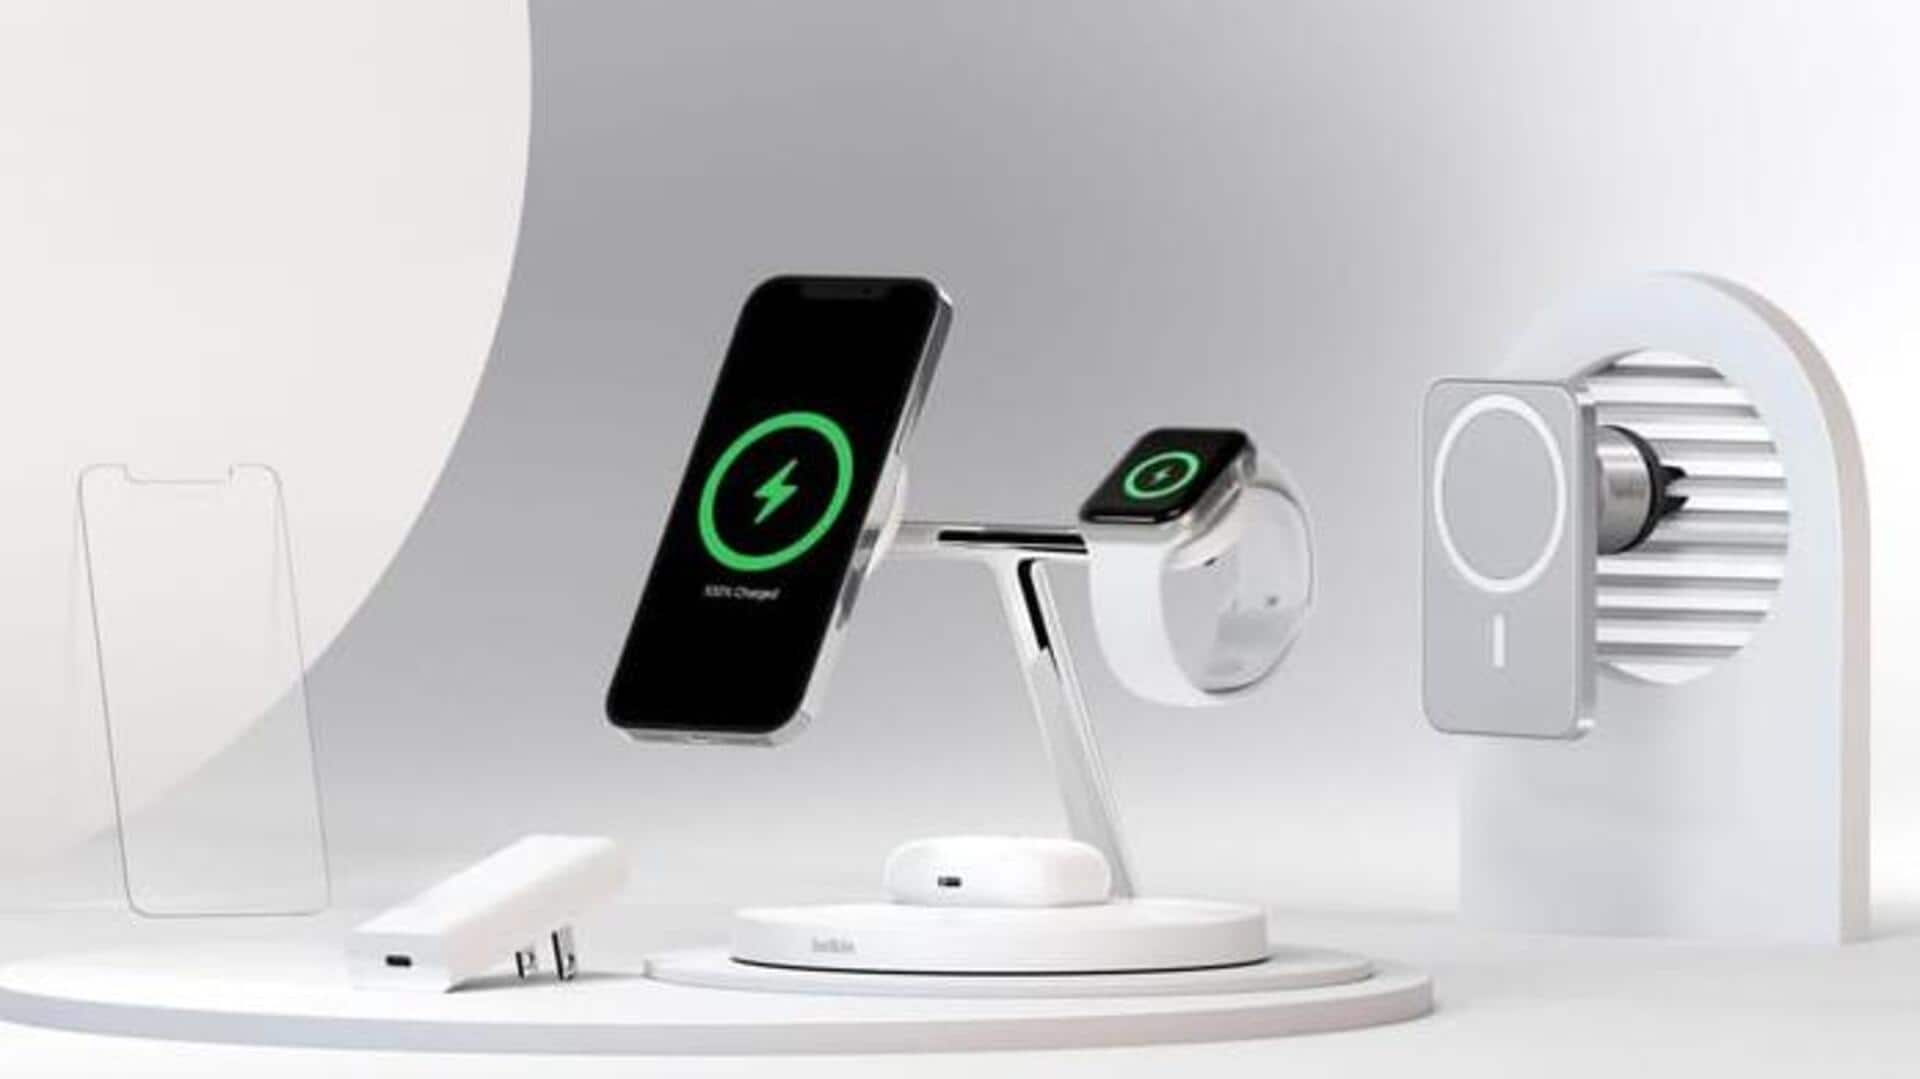 Qi2 wireless charging coming to recent iPhones: Why it matters